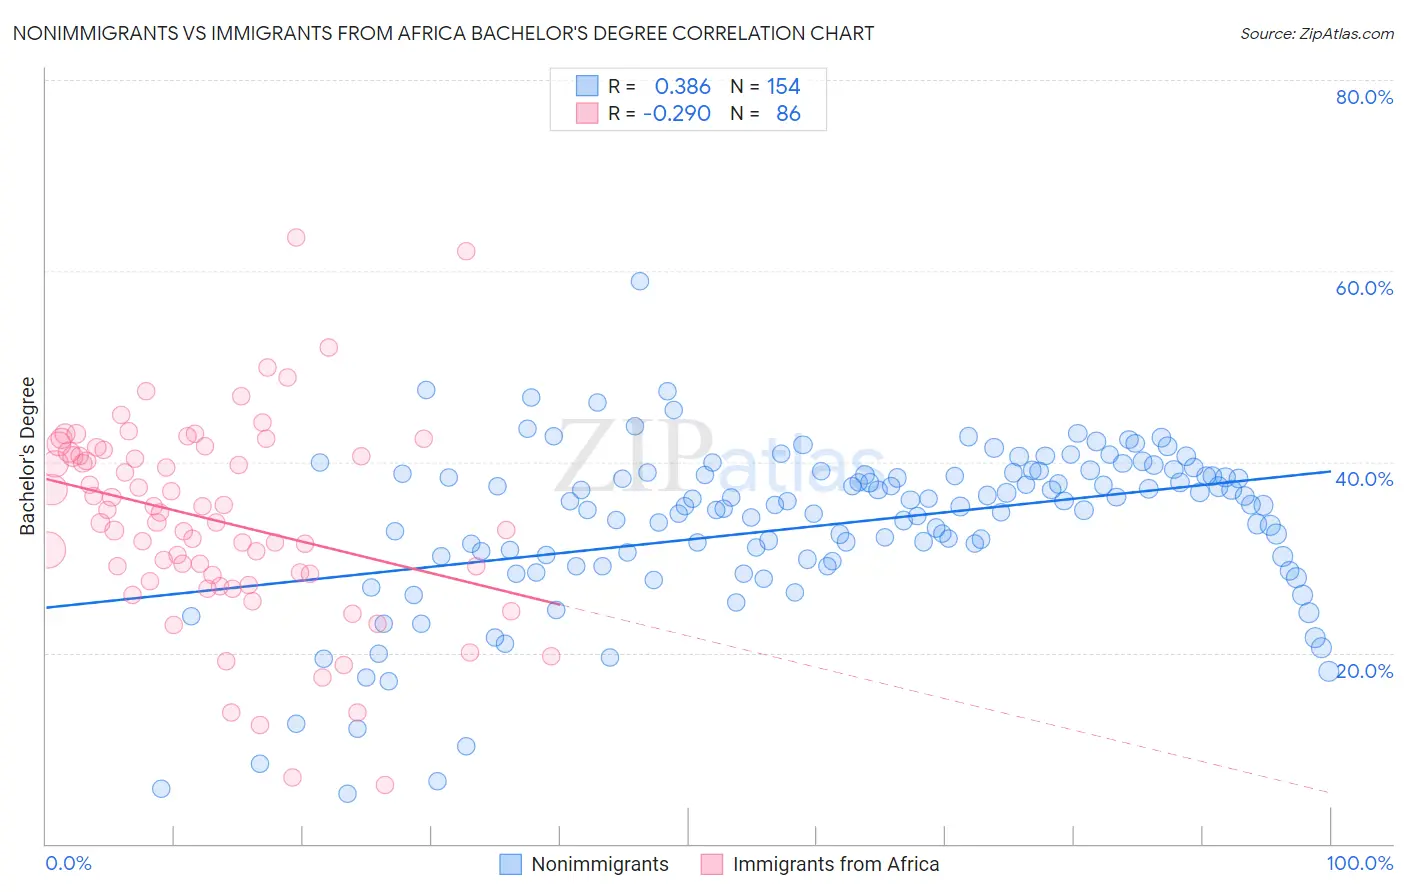 Nonimmigrants vs Immigrants from Africa Bachelor's Degree